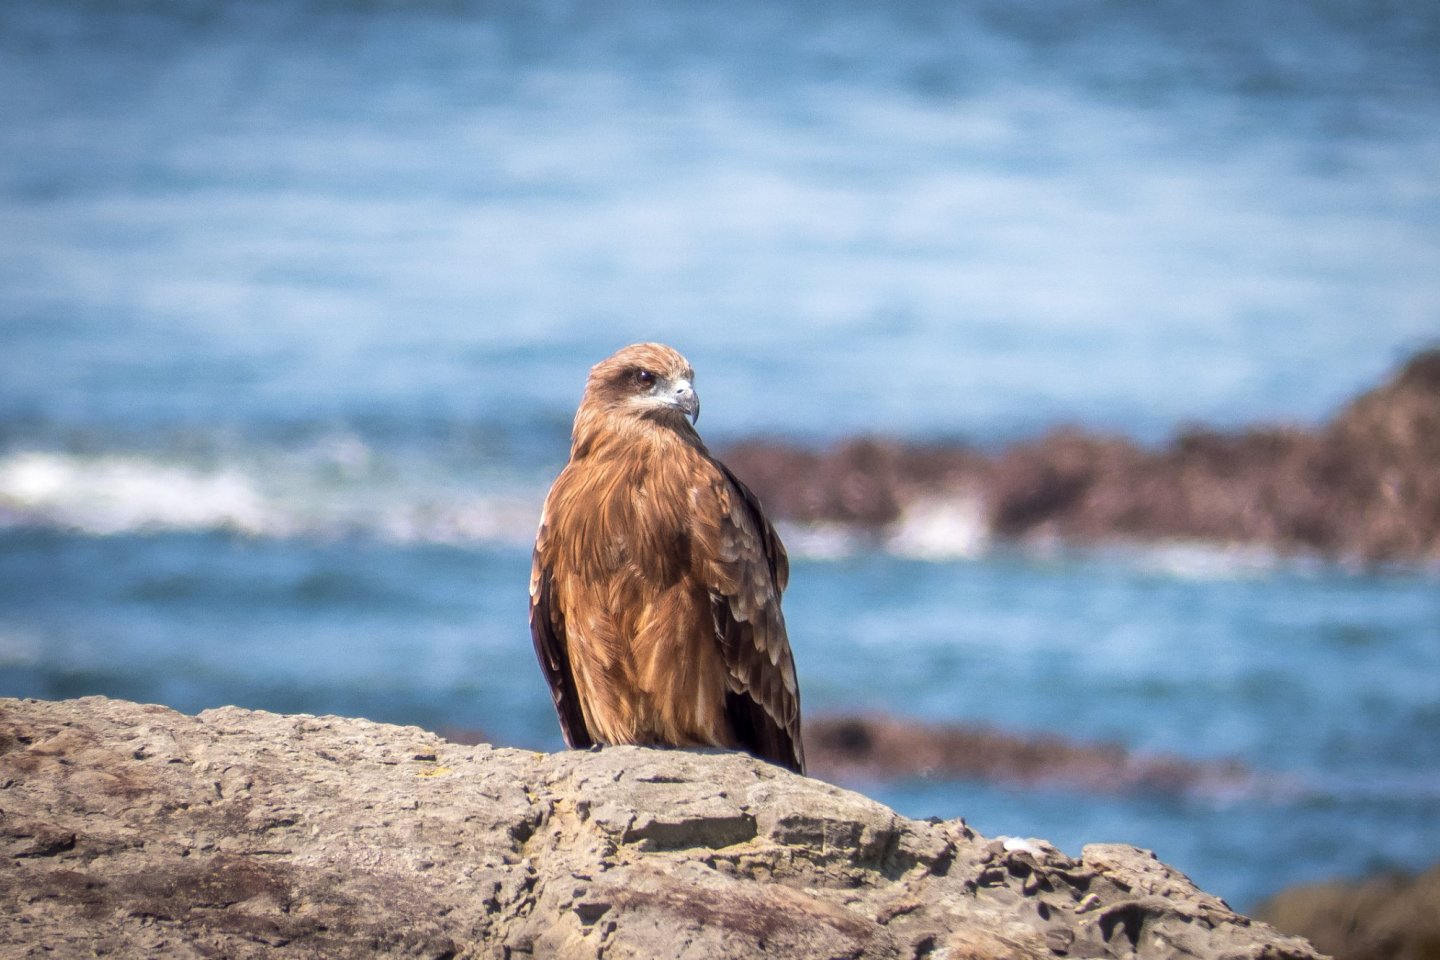 As soon as you enter this island you will see many Black Kite